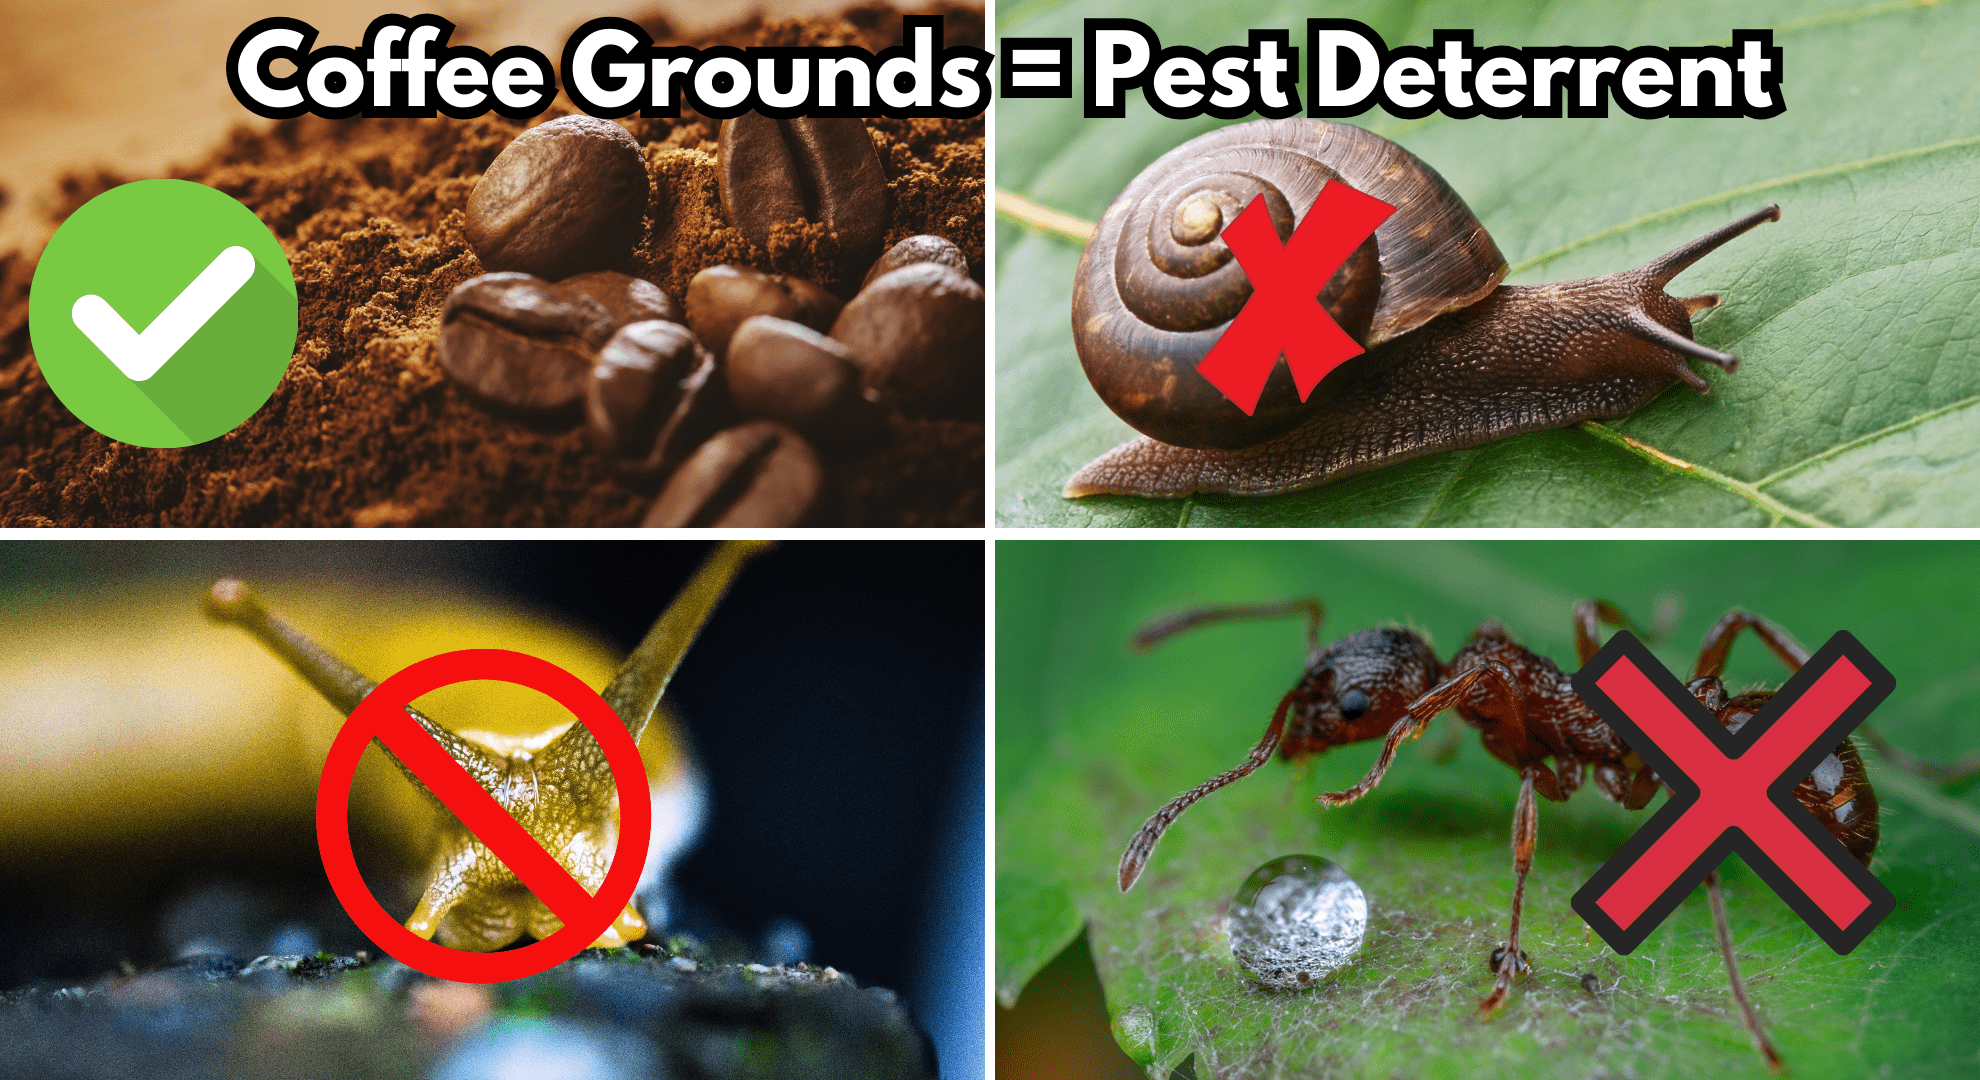 Coffee Grounds for Pest Control against slugs, snails ants